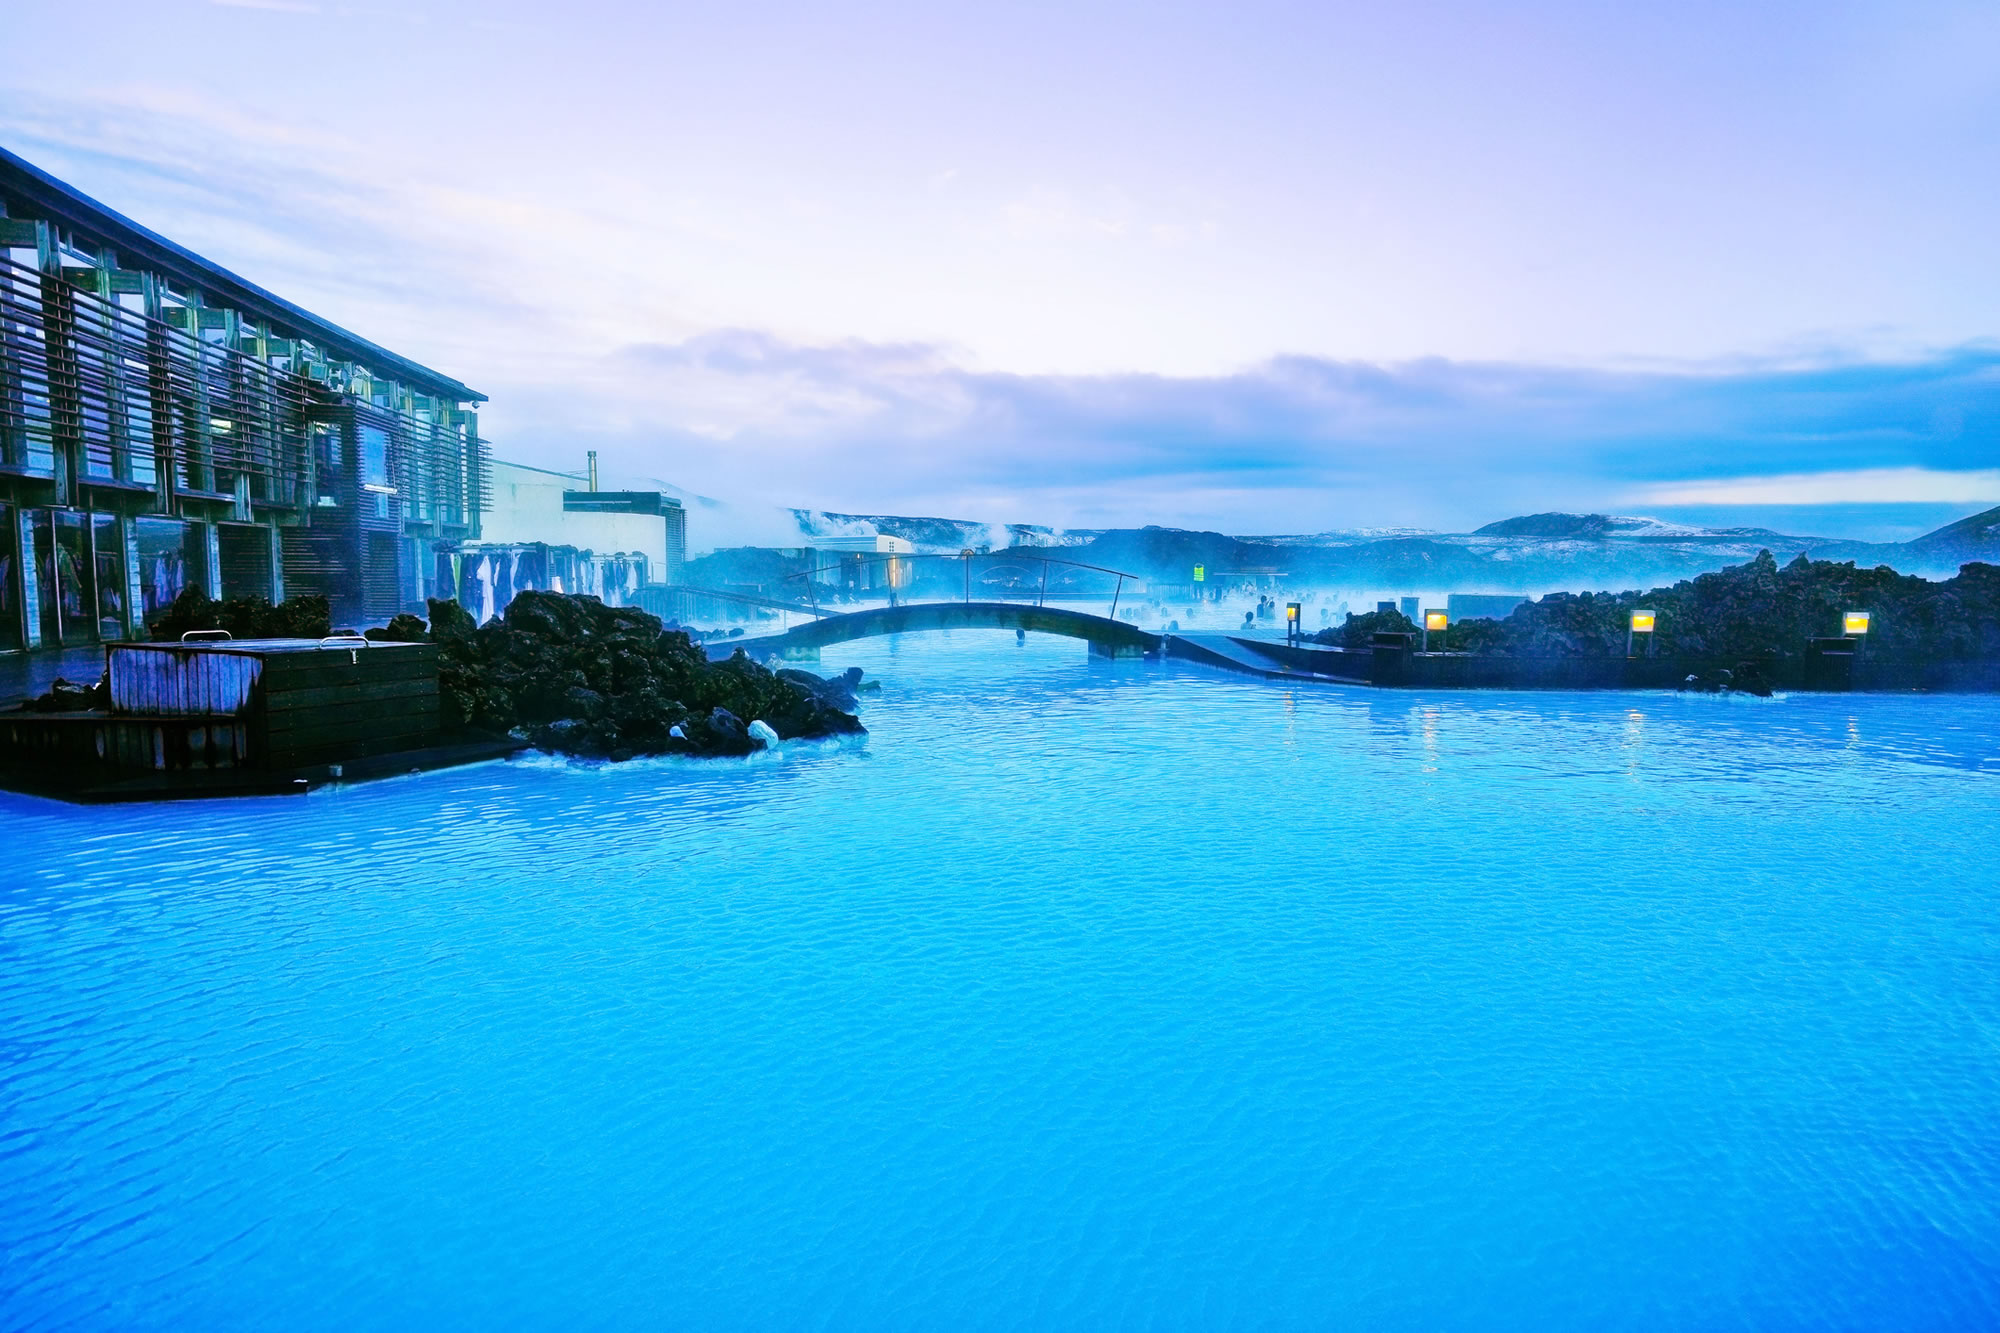 Take a Dip in Iceland’s Blue Lagoon